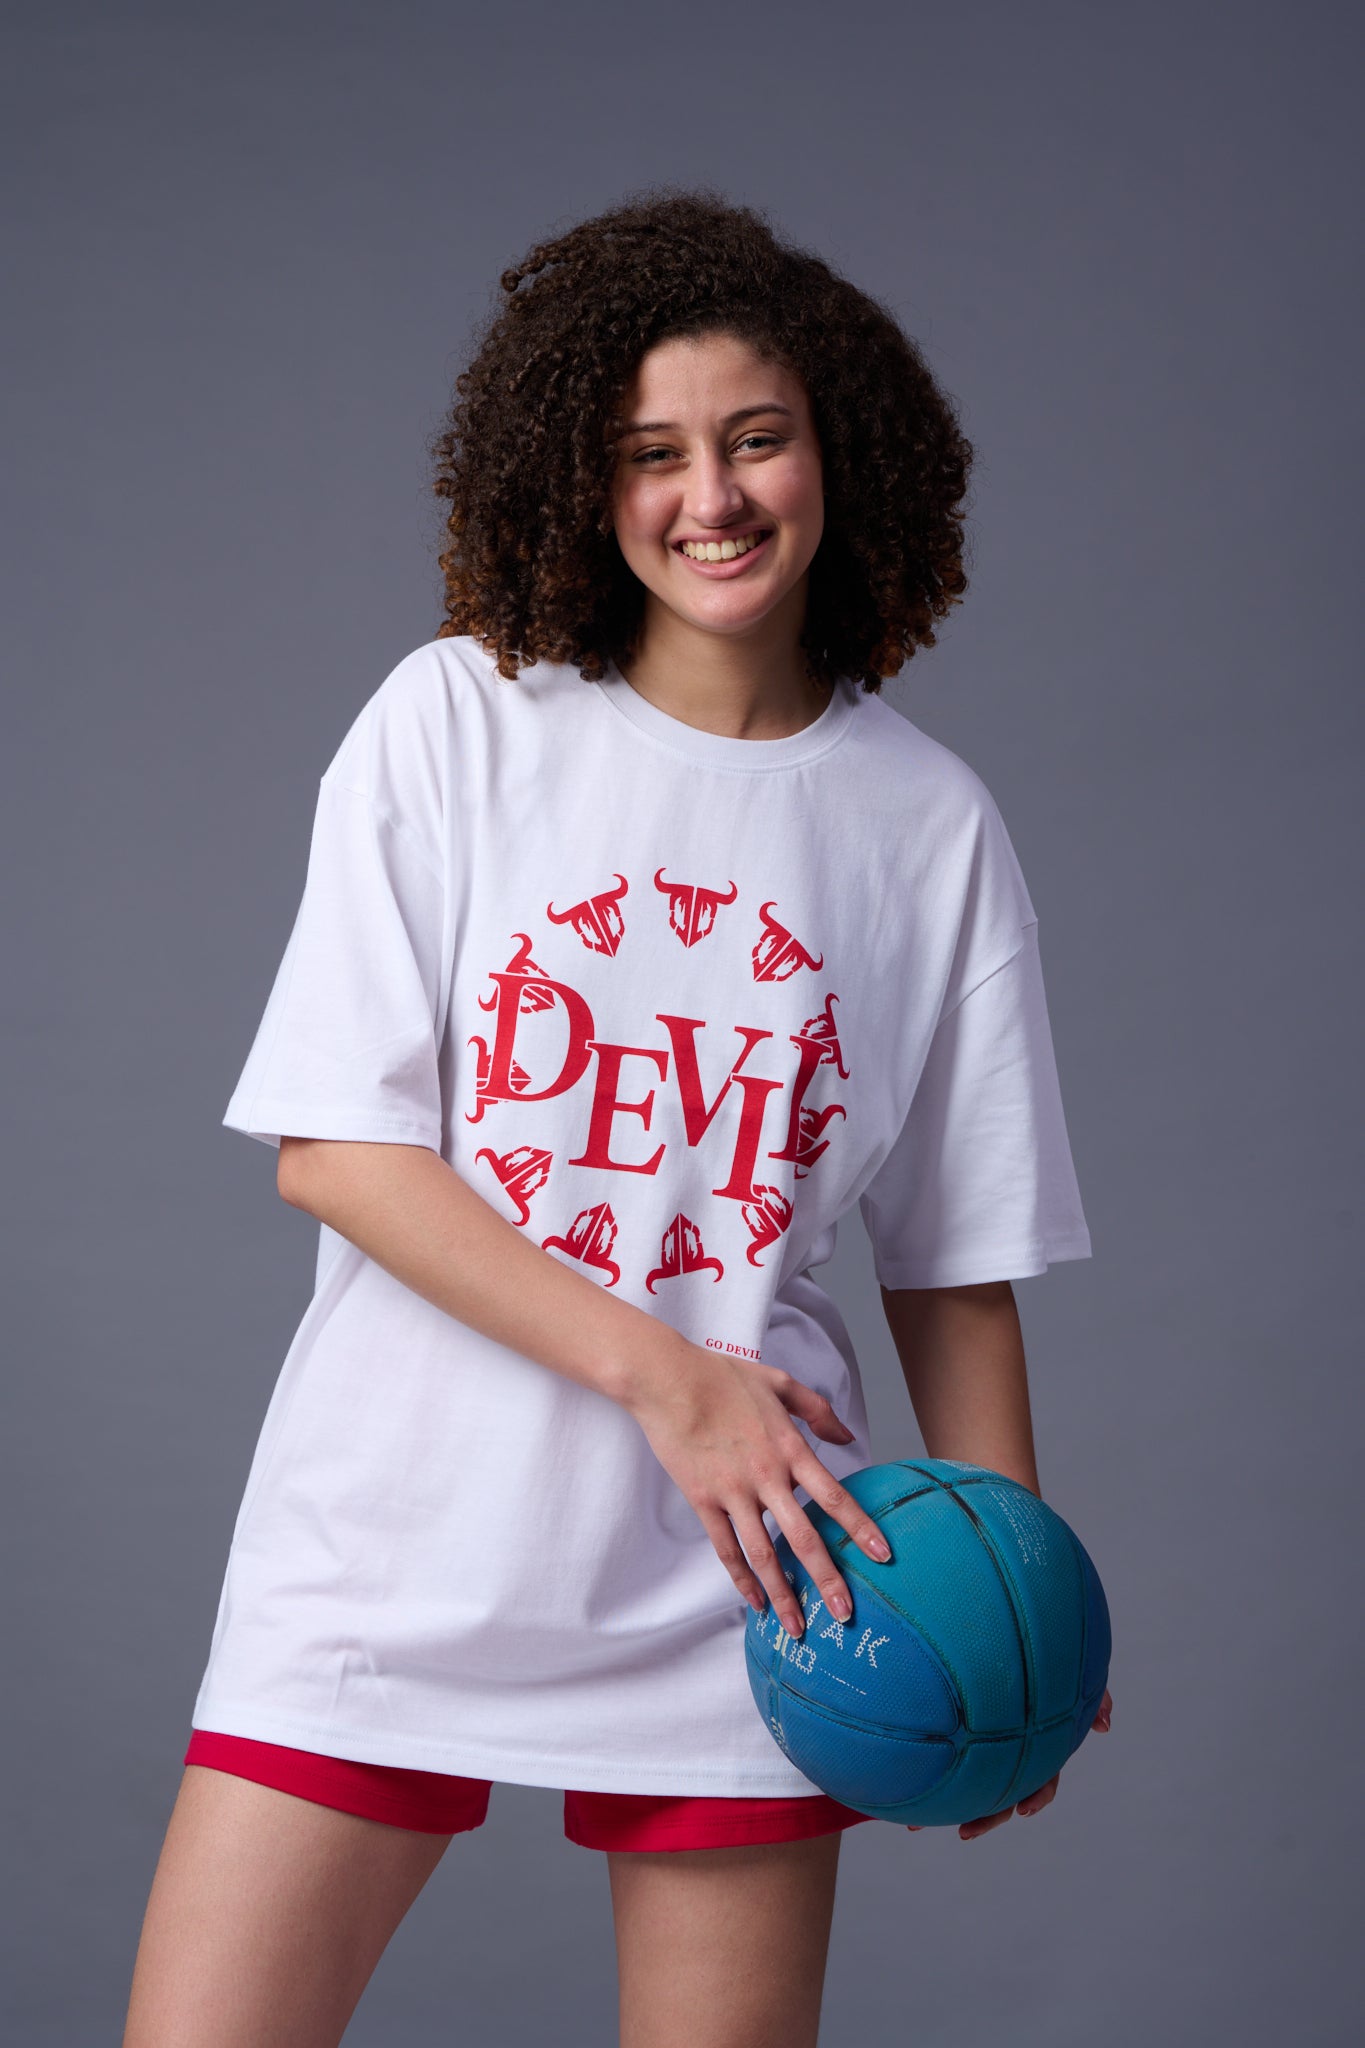 Devil Stamp (in Red) Printed White Oversized T-Shirt for Women